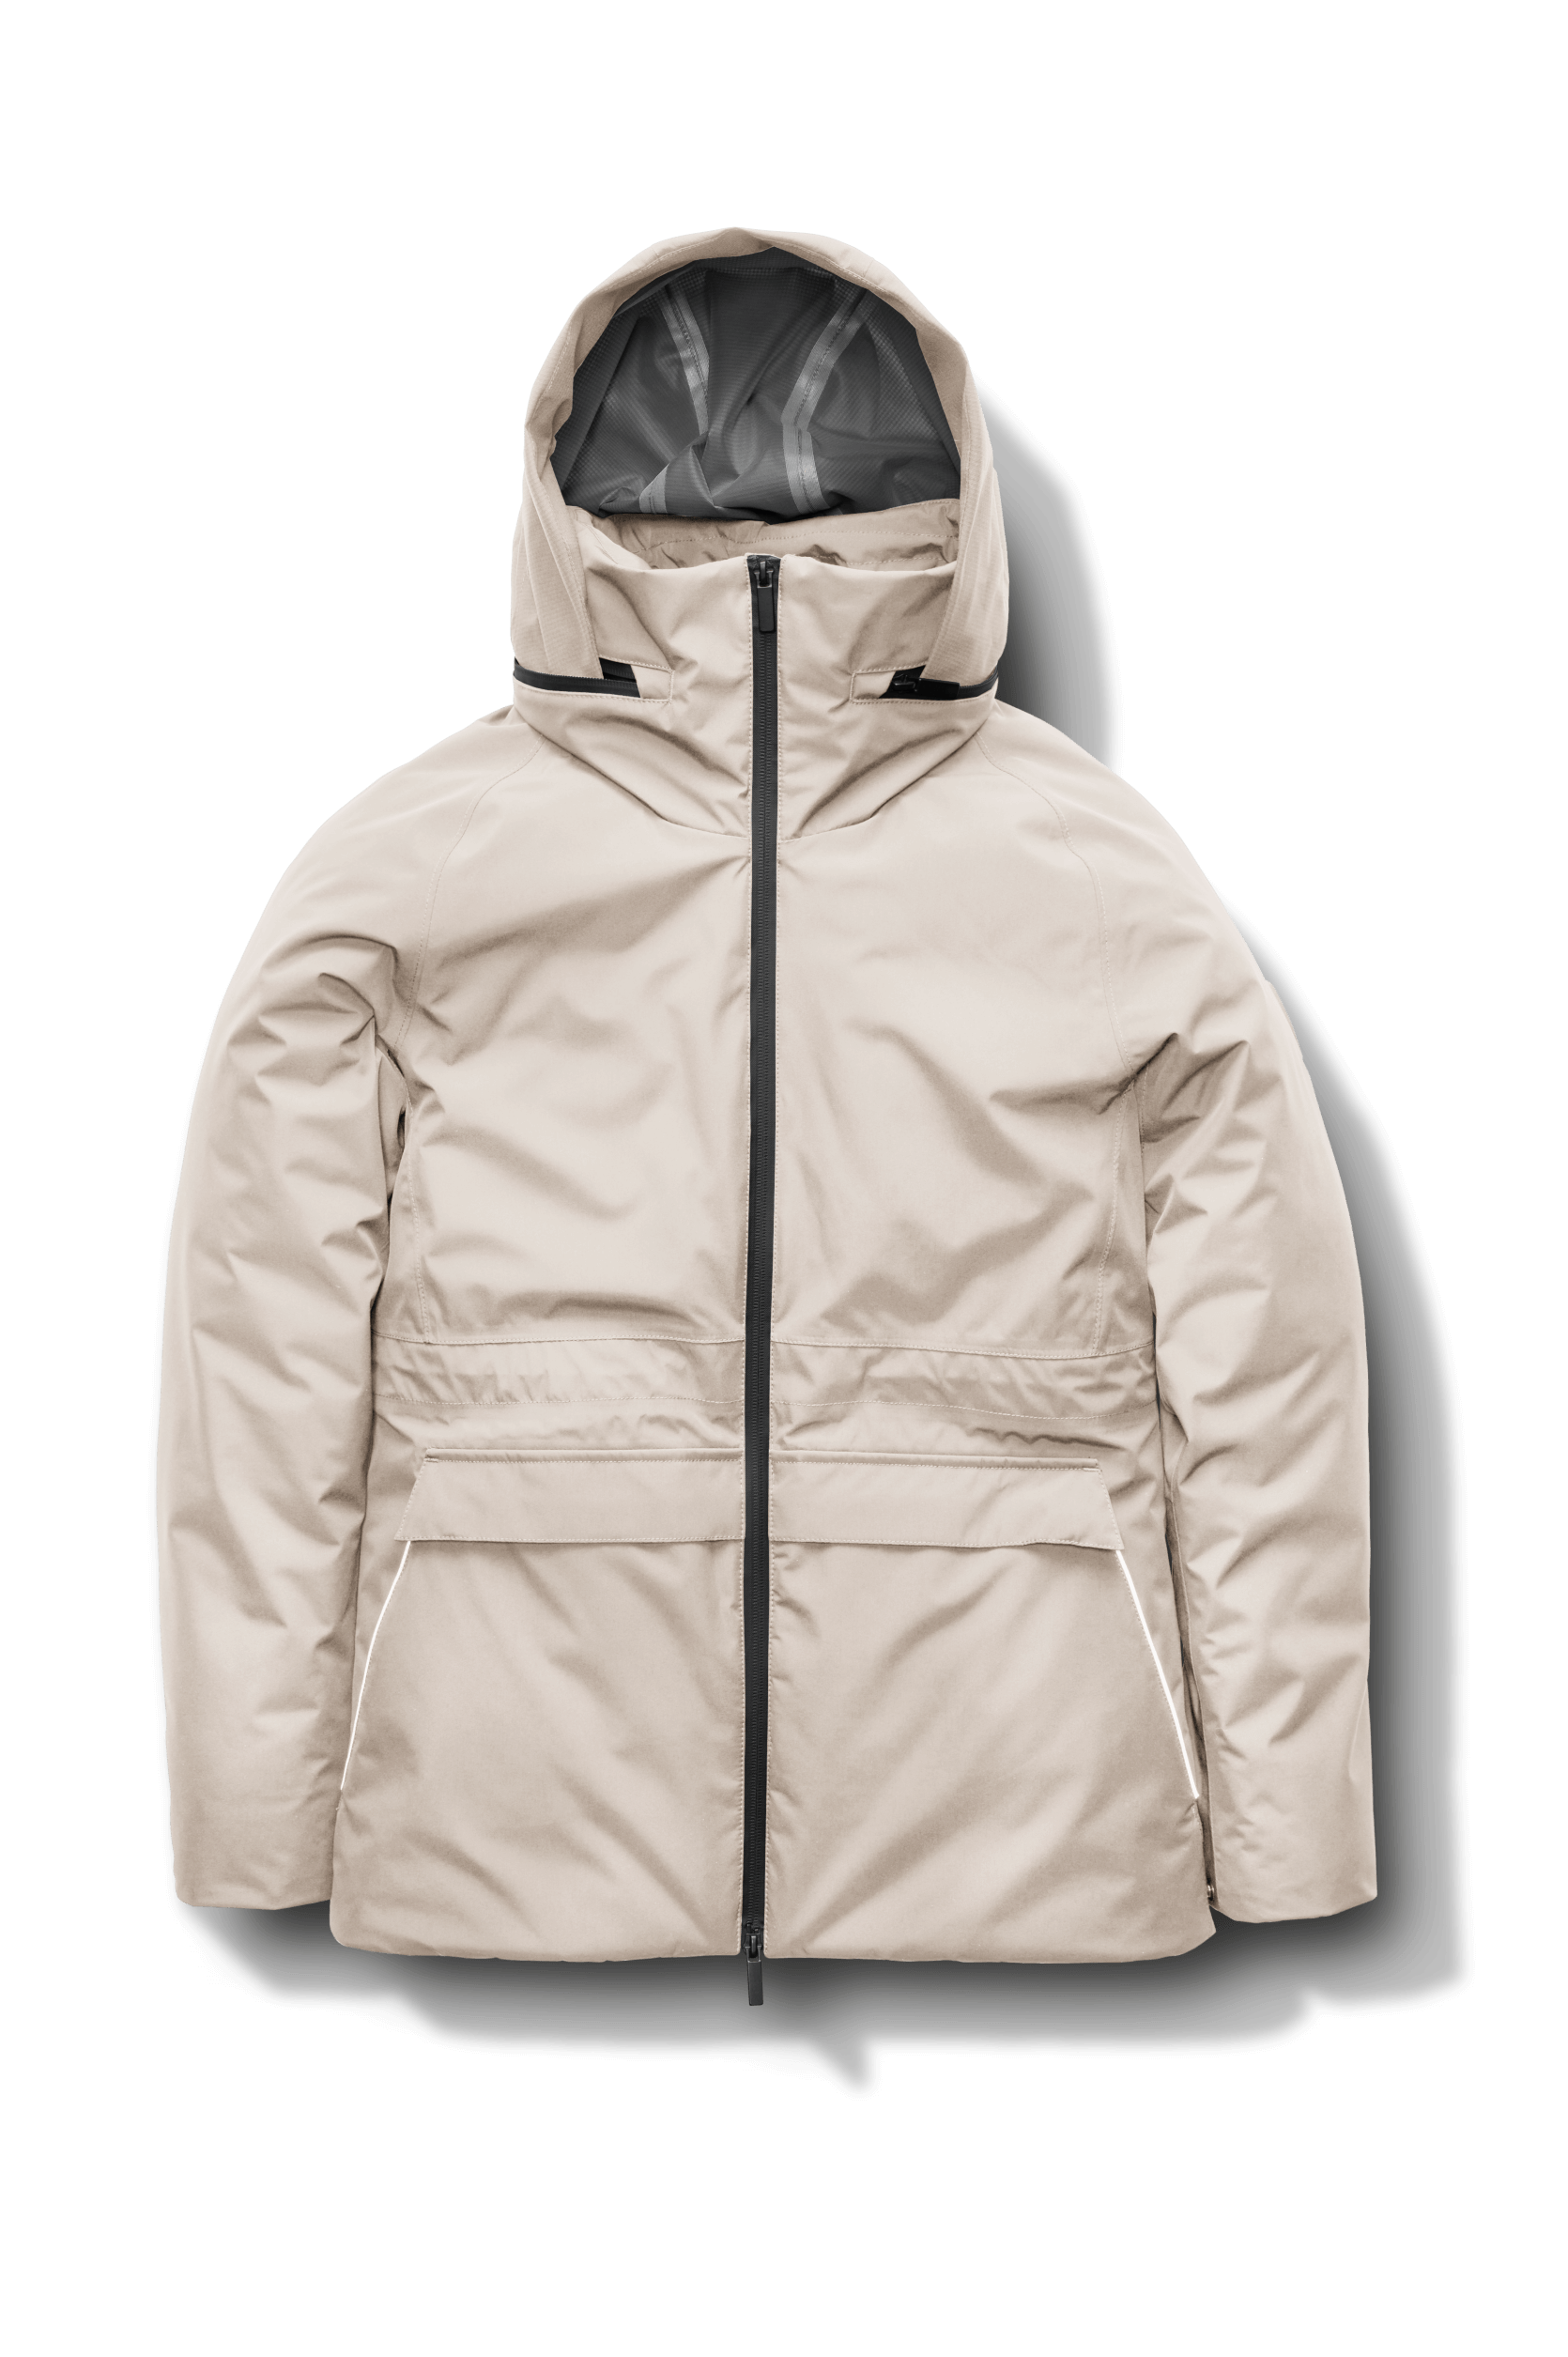 Litho Ladies Short Parka in hip length, Canadian duck down insulation, tuckable waterproof hood, and two-way zipper, in Clay